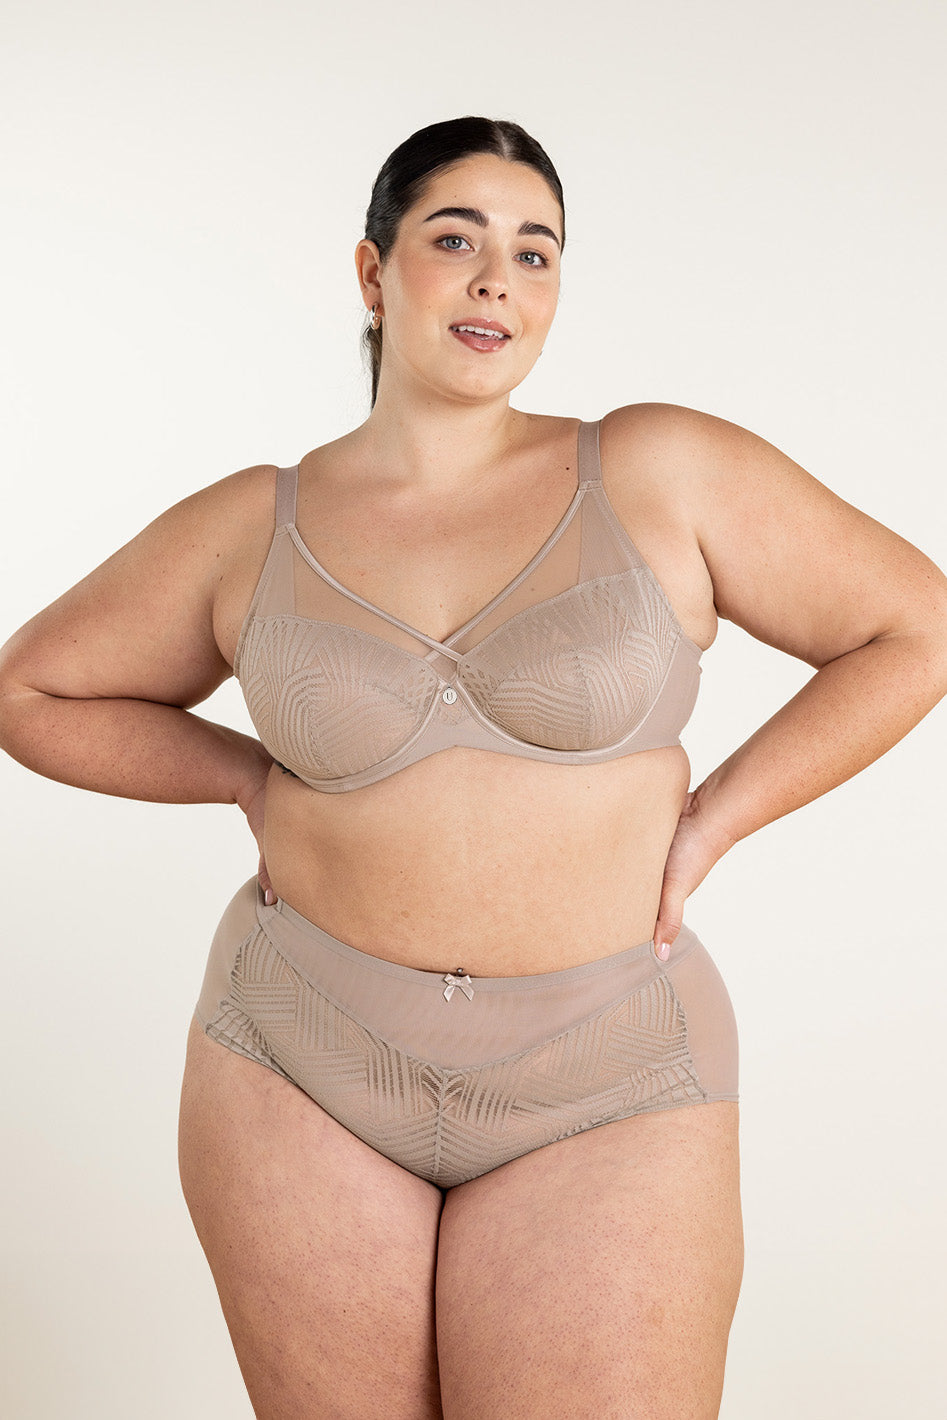  Womens Wireless Plus Size Lace Bra Unlined Full Coverage  Comfort Cotton Taupe 42C